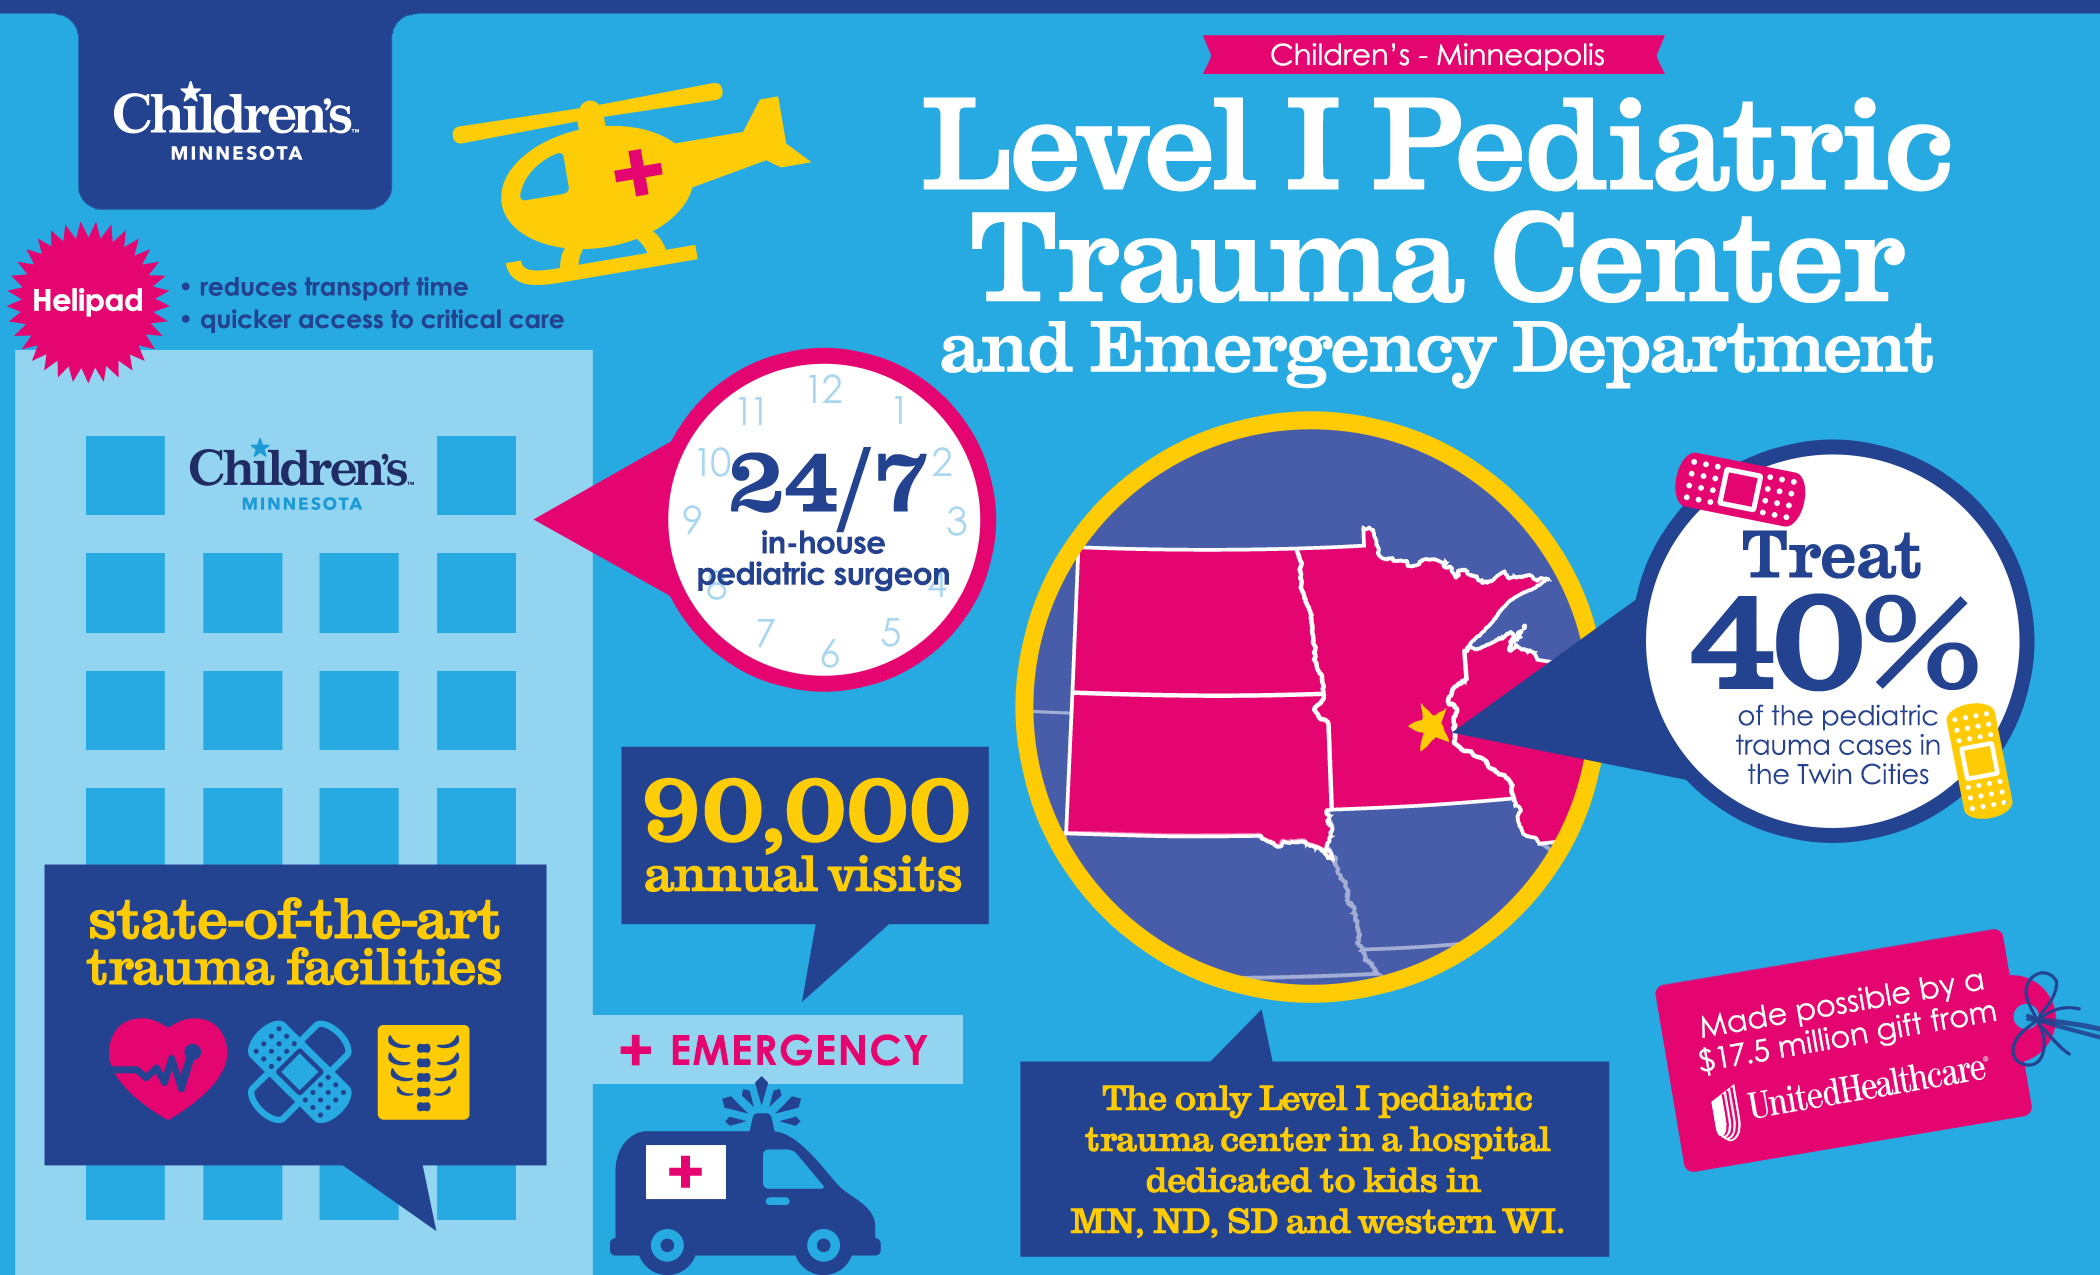 difference in trauma center levels